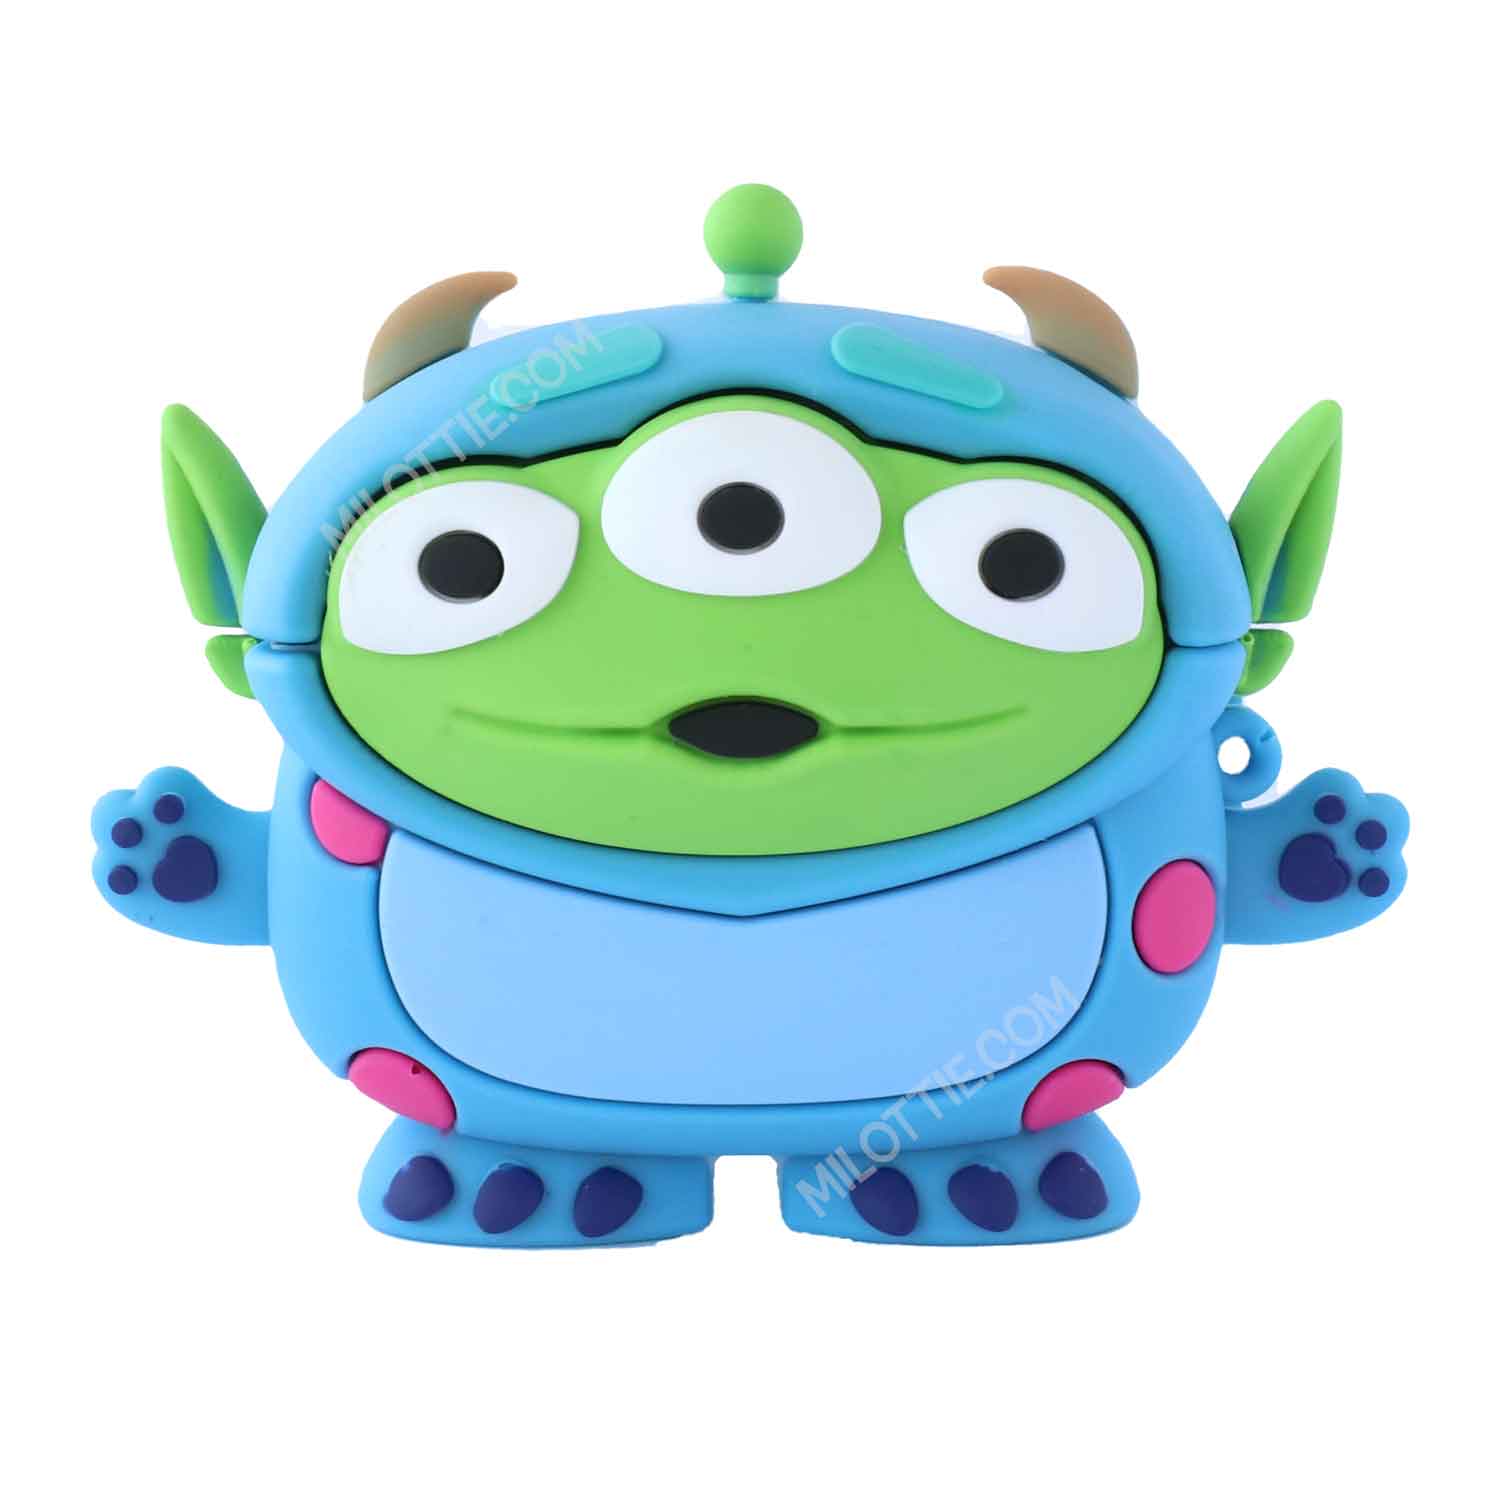 Toy Story Alien in Sulley Monster Costume Airpods Case